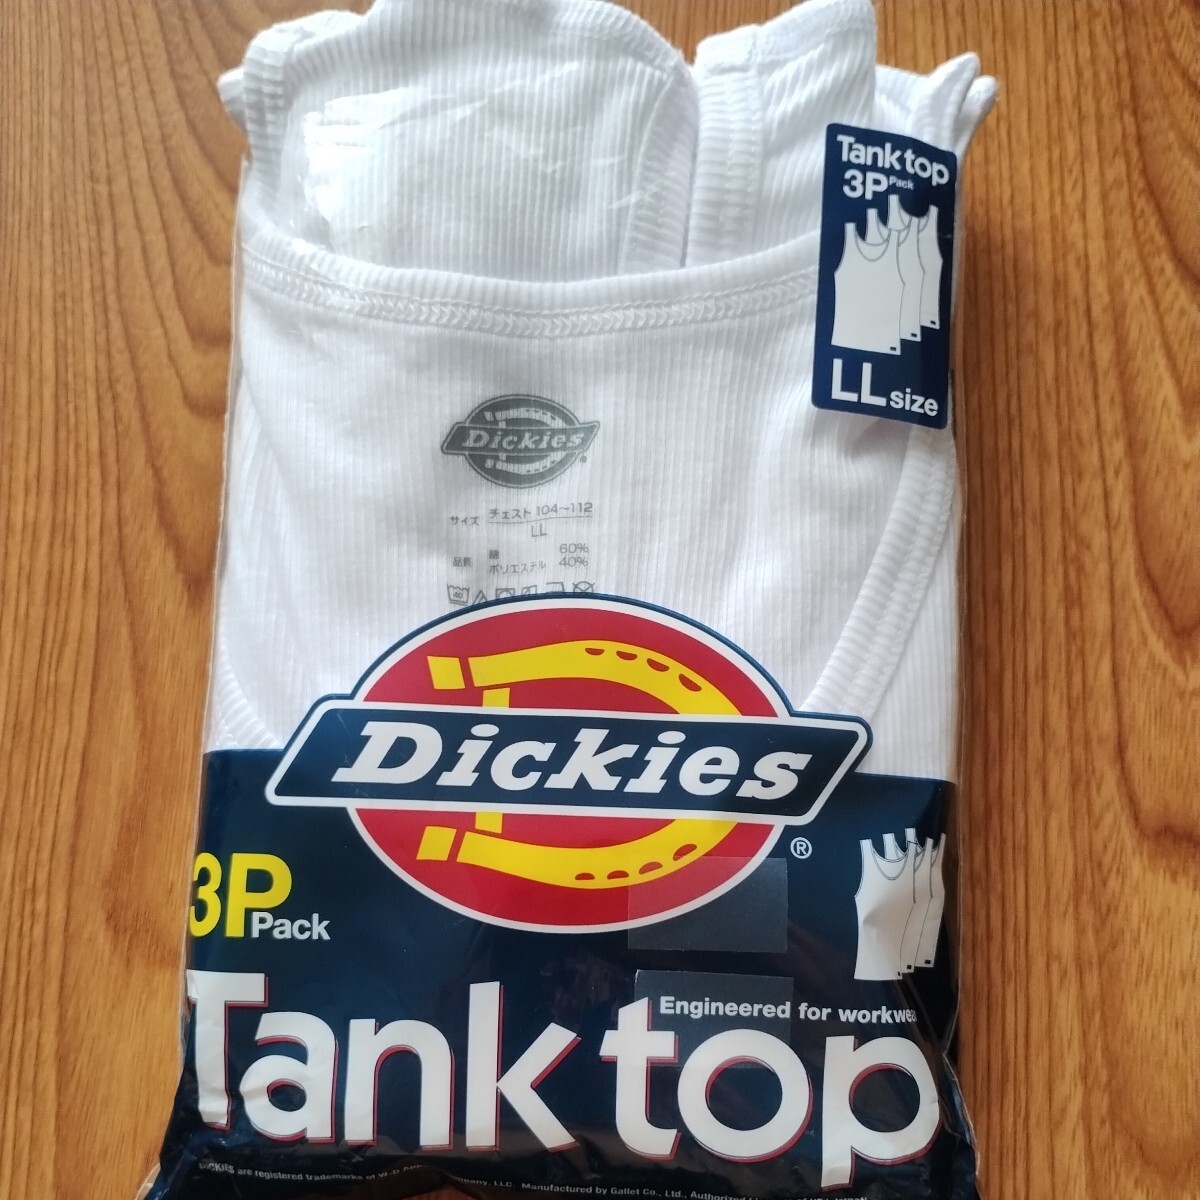  Dickies tank top 2 pieces set size LL size white 